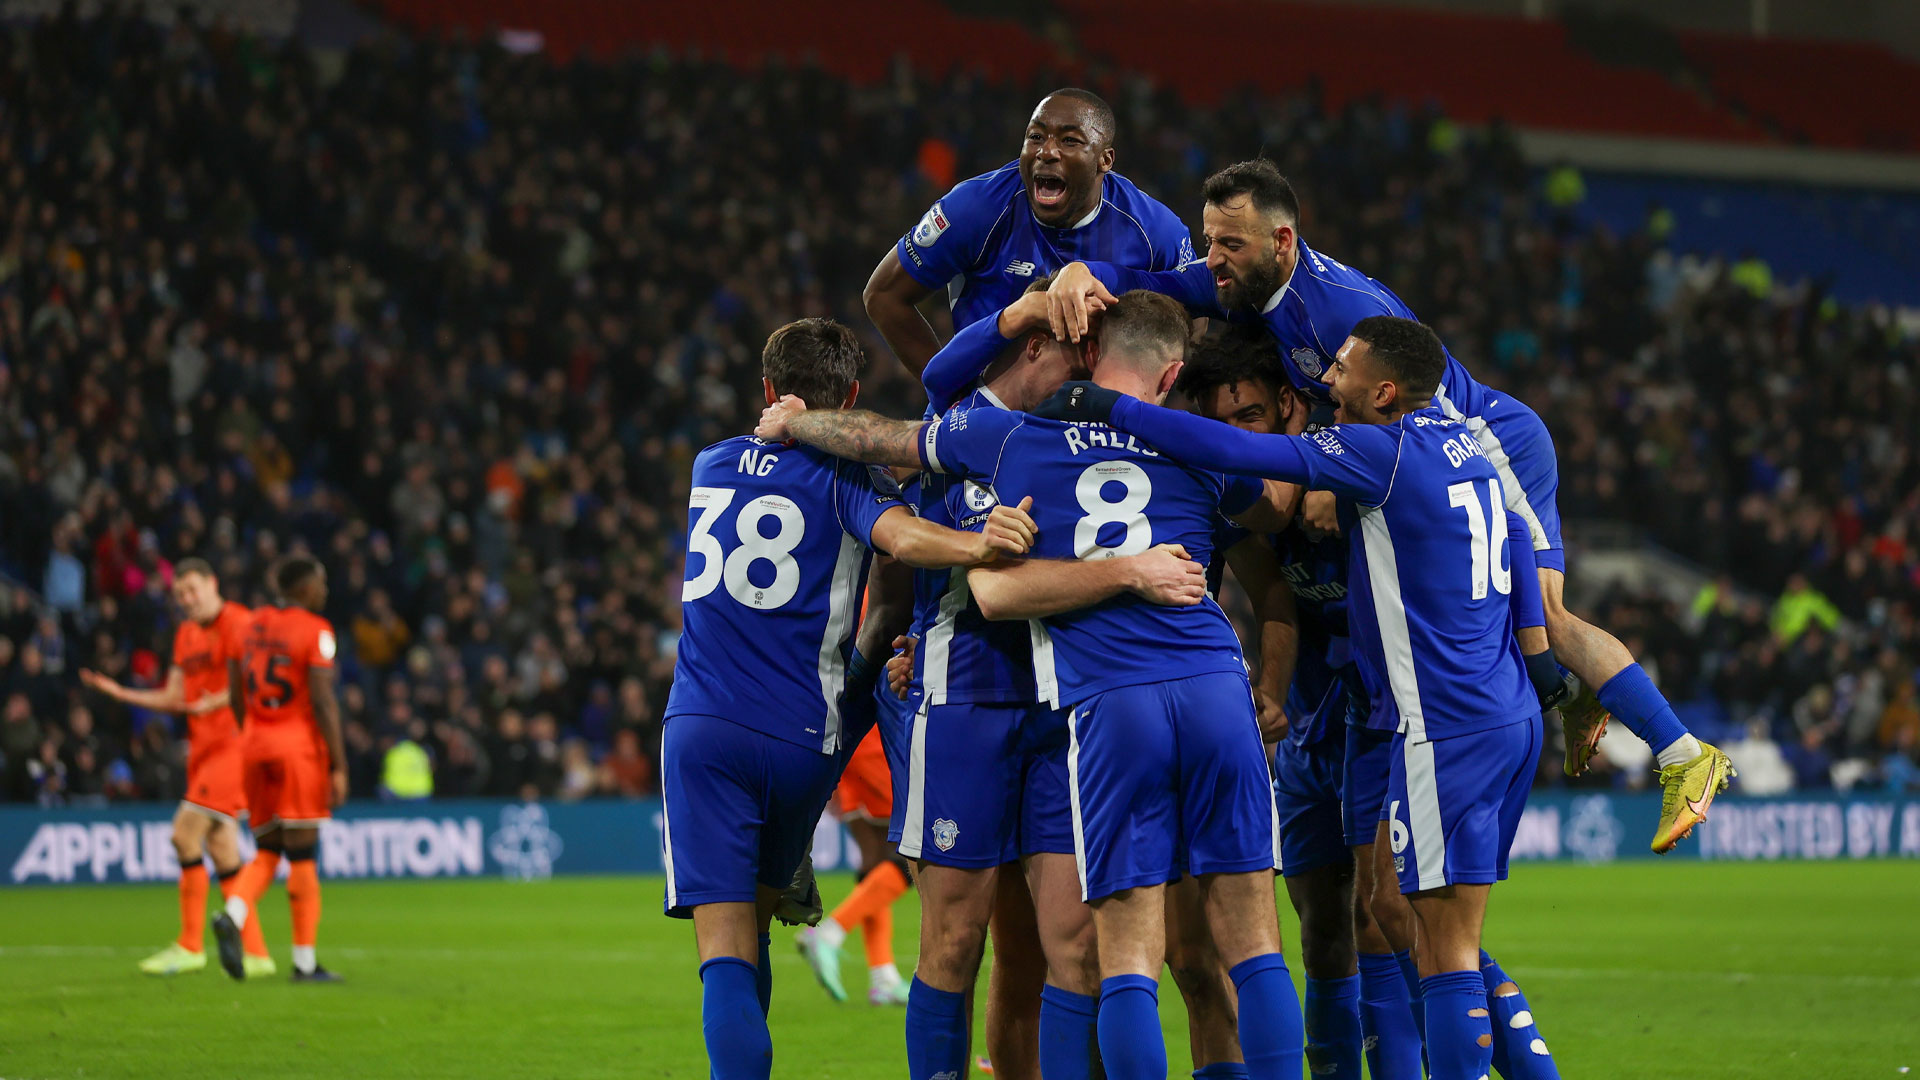 Cardiff City celebrate taking the lead against Millwall